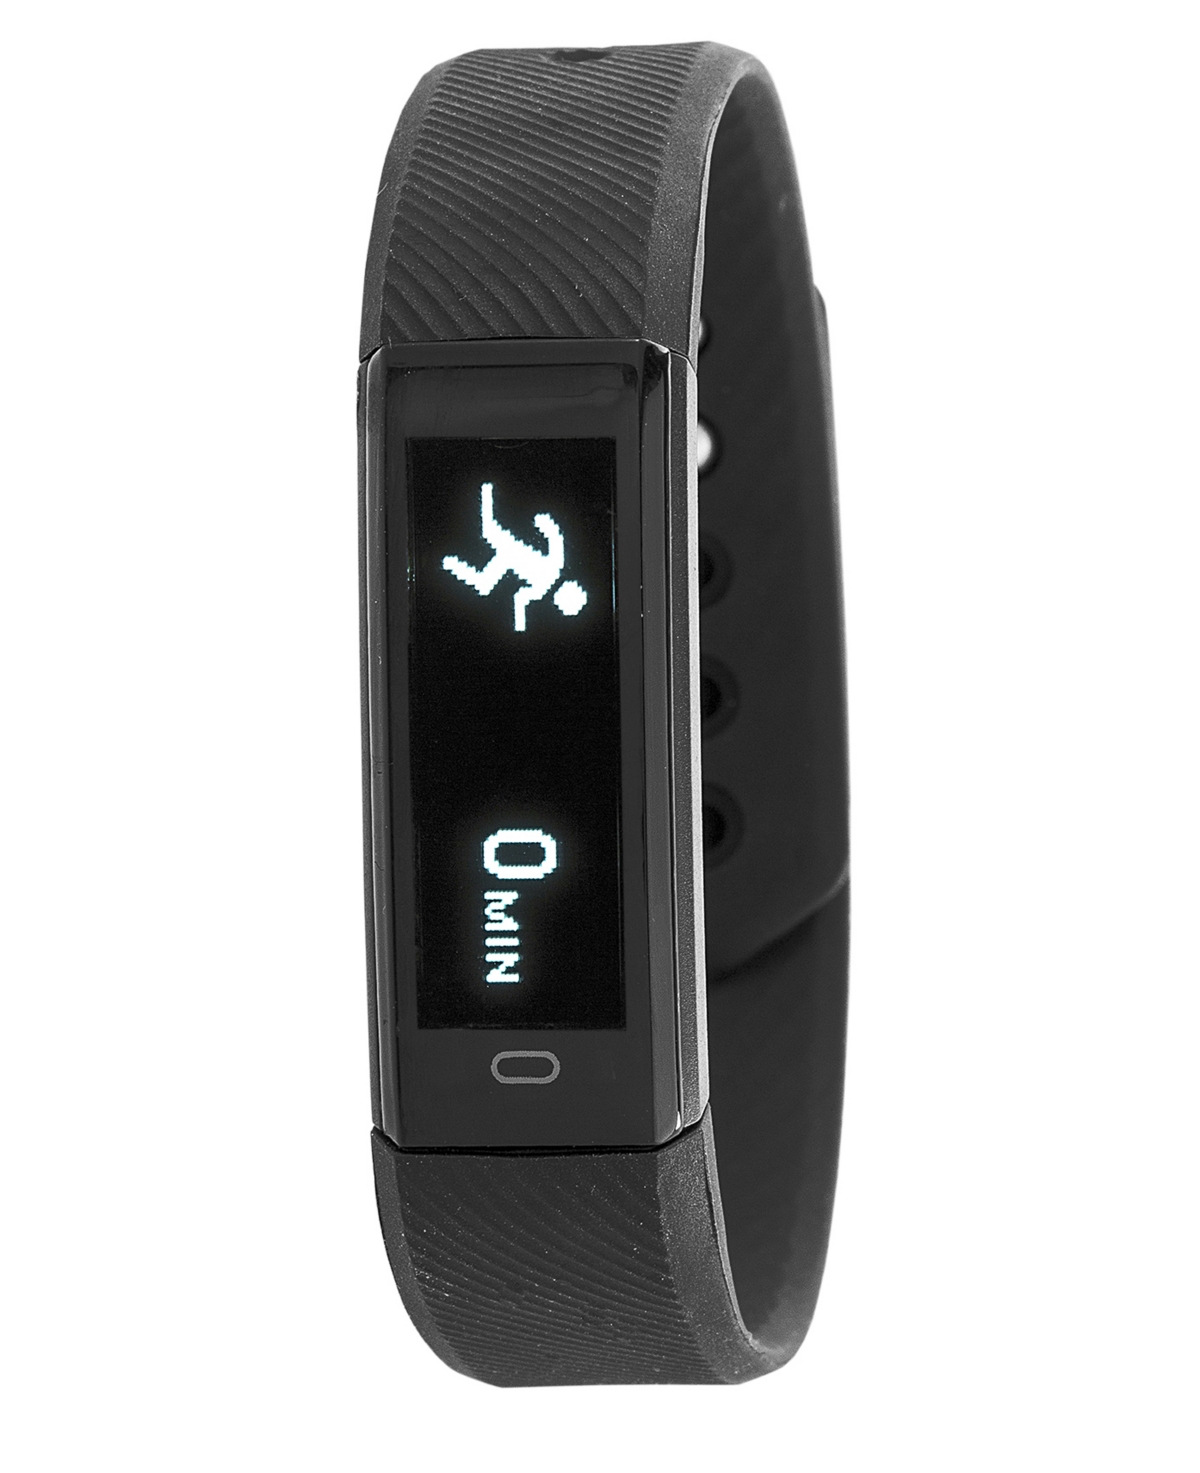 Everlast TR9 Activity Tracker and Heart Rate Monitor